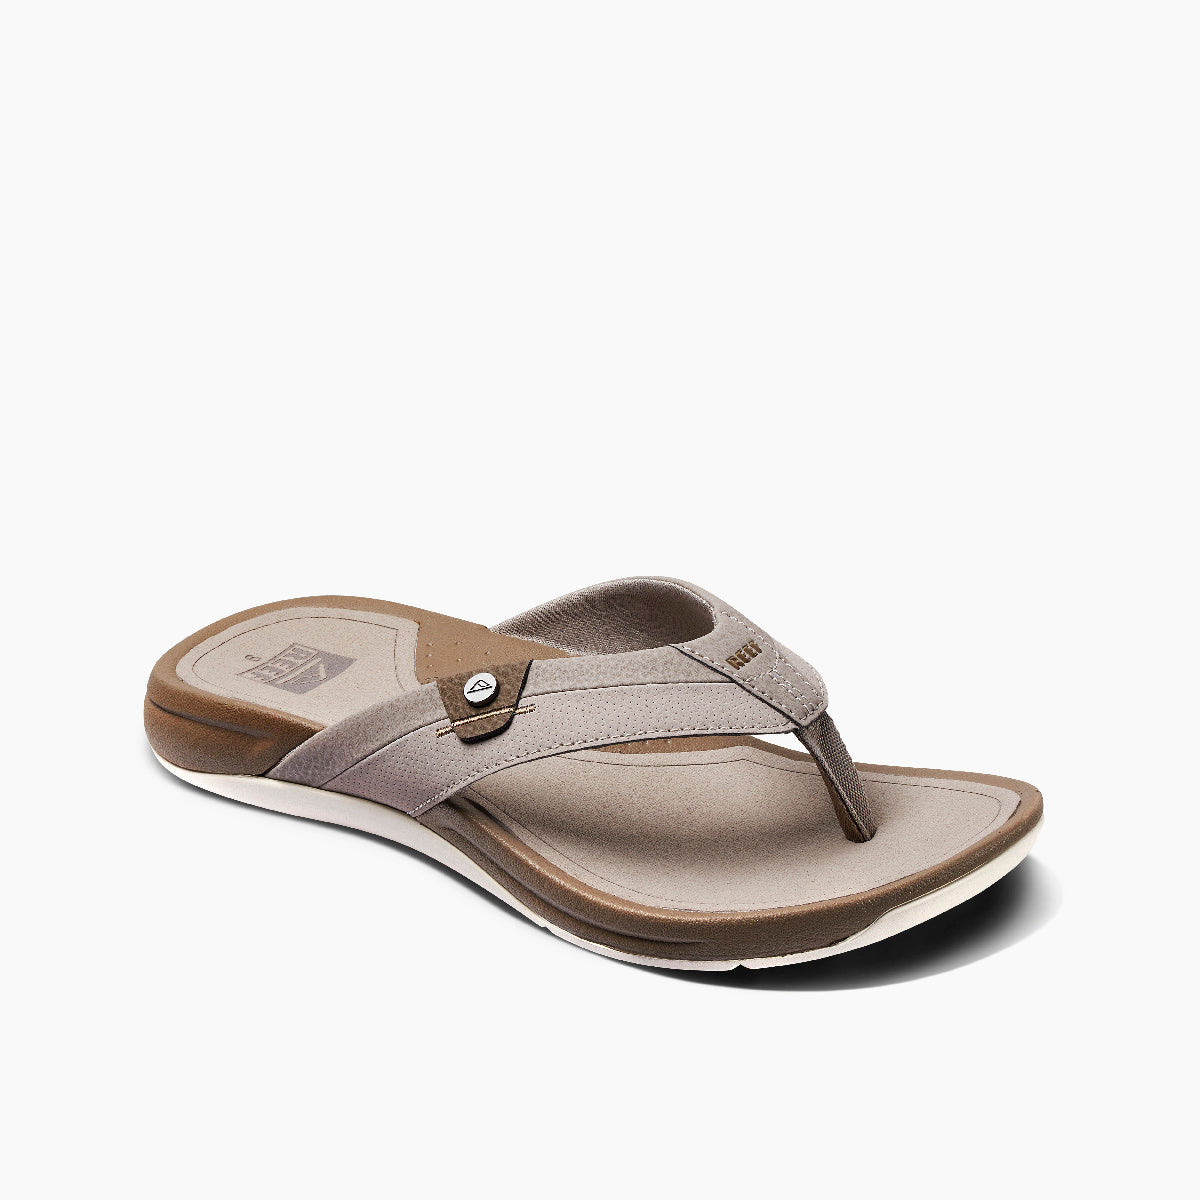 Reef Pacific Mens Sandal Taupe-Fossil 9